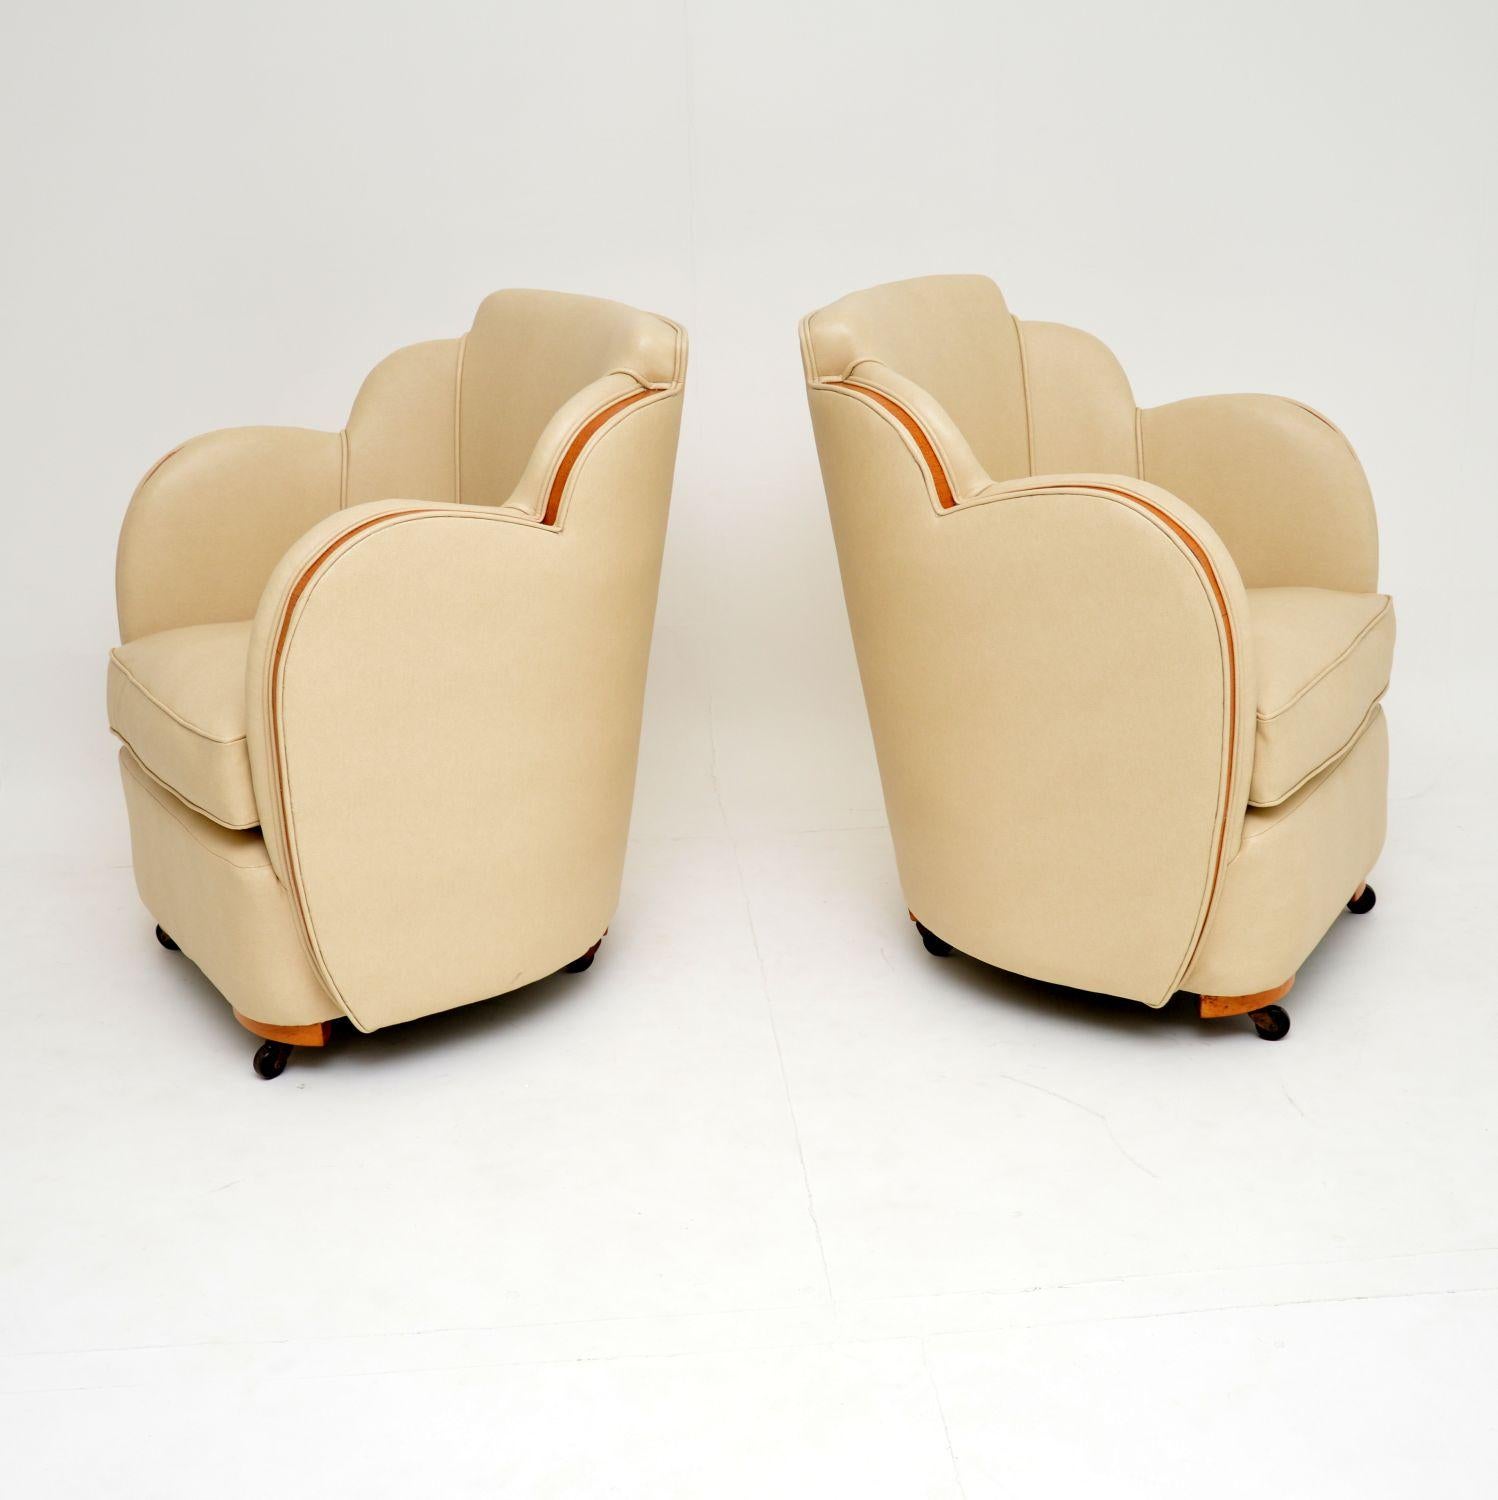 Early 20th Century Pair of Original Art Deco Cloud Back Armchairs by Epstein